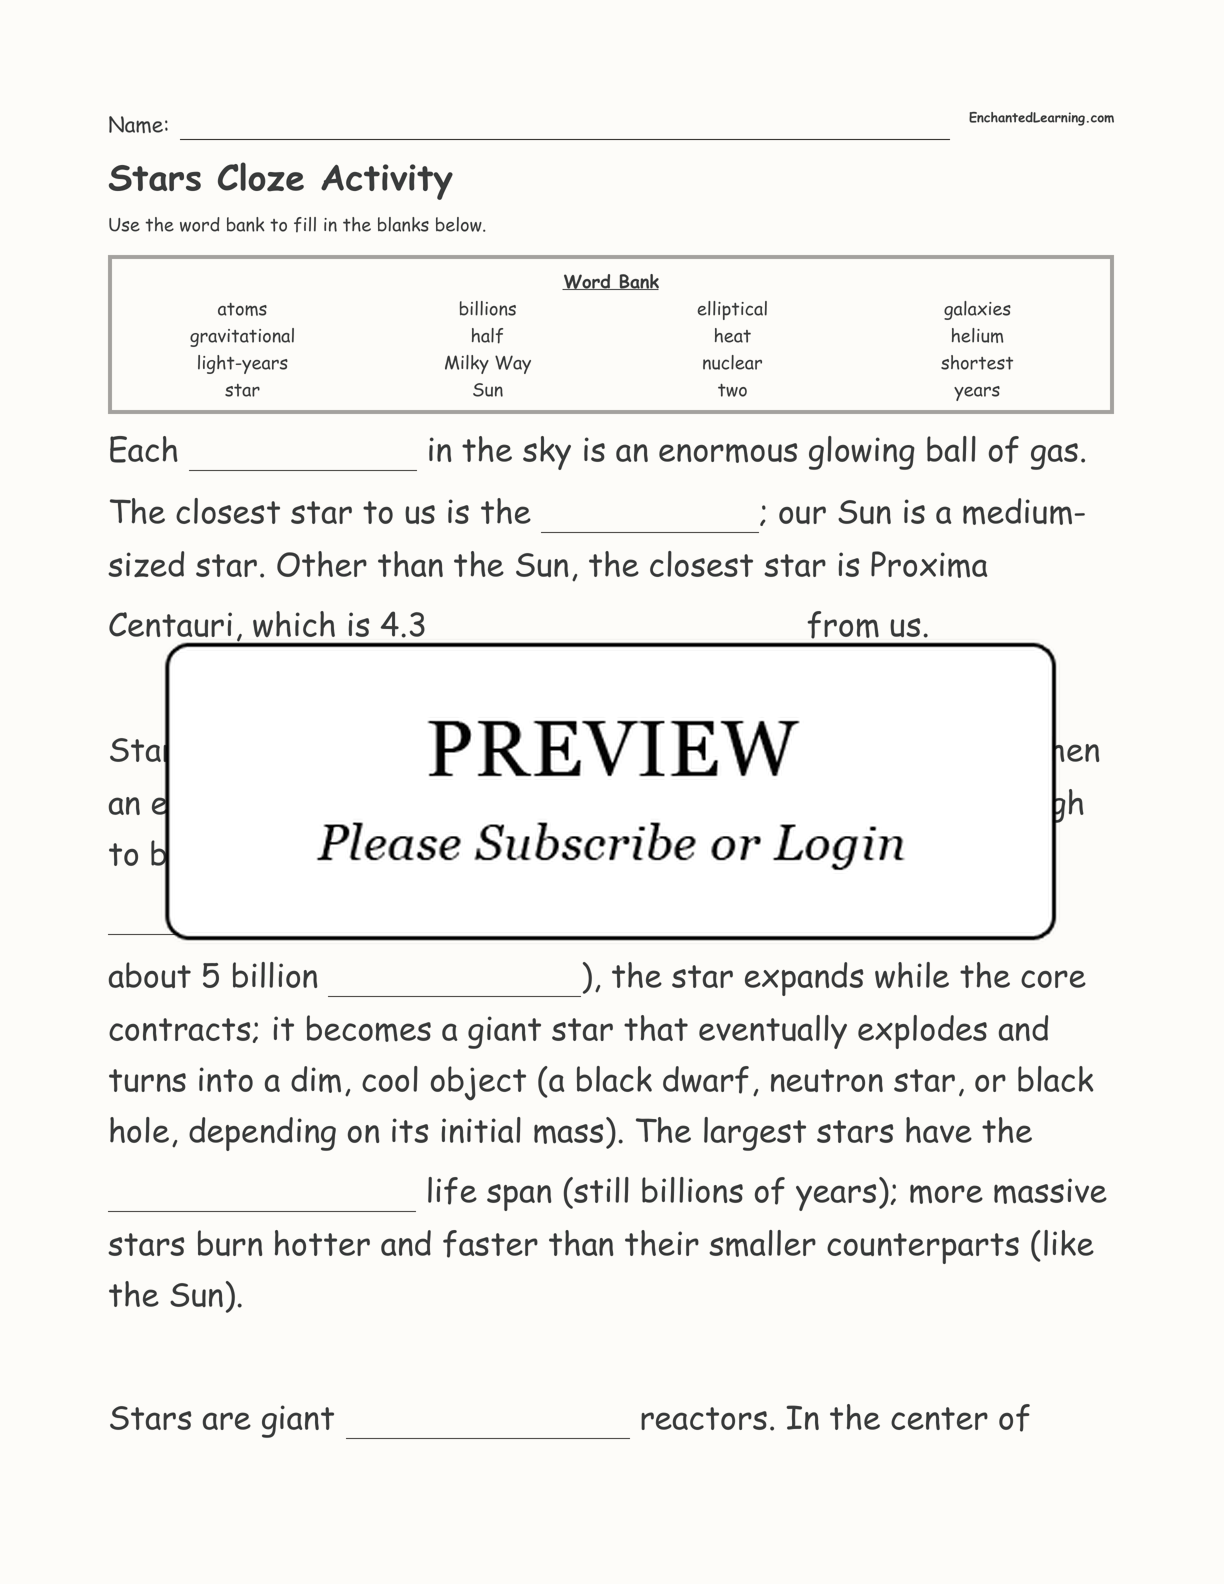 Stars Cloze Activity interactive worksheet page 1